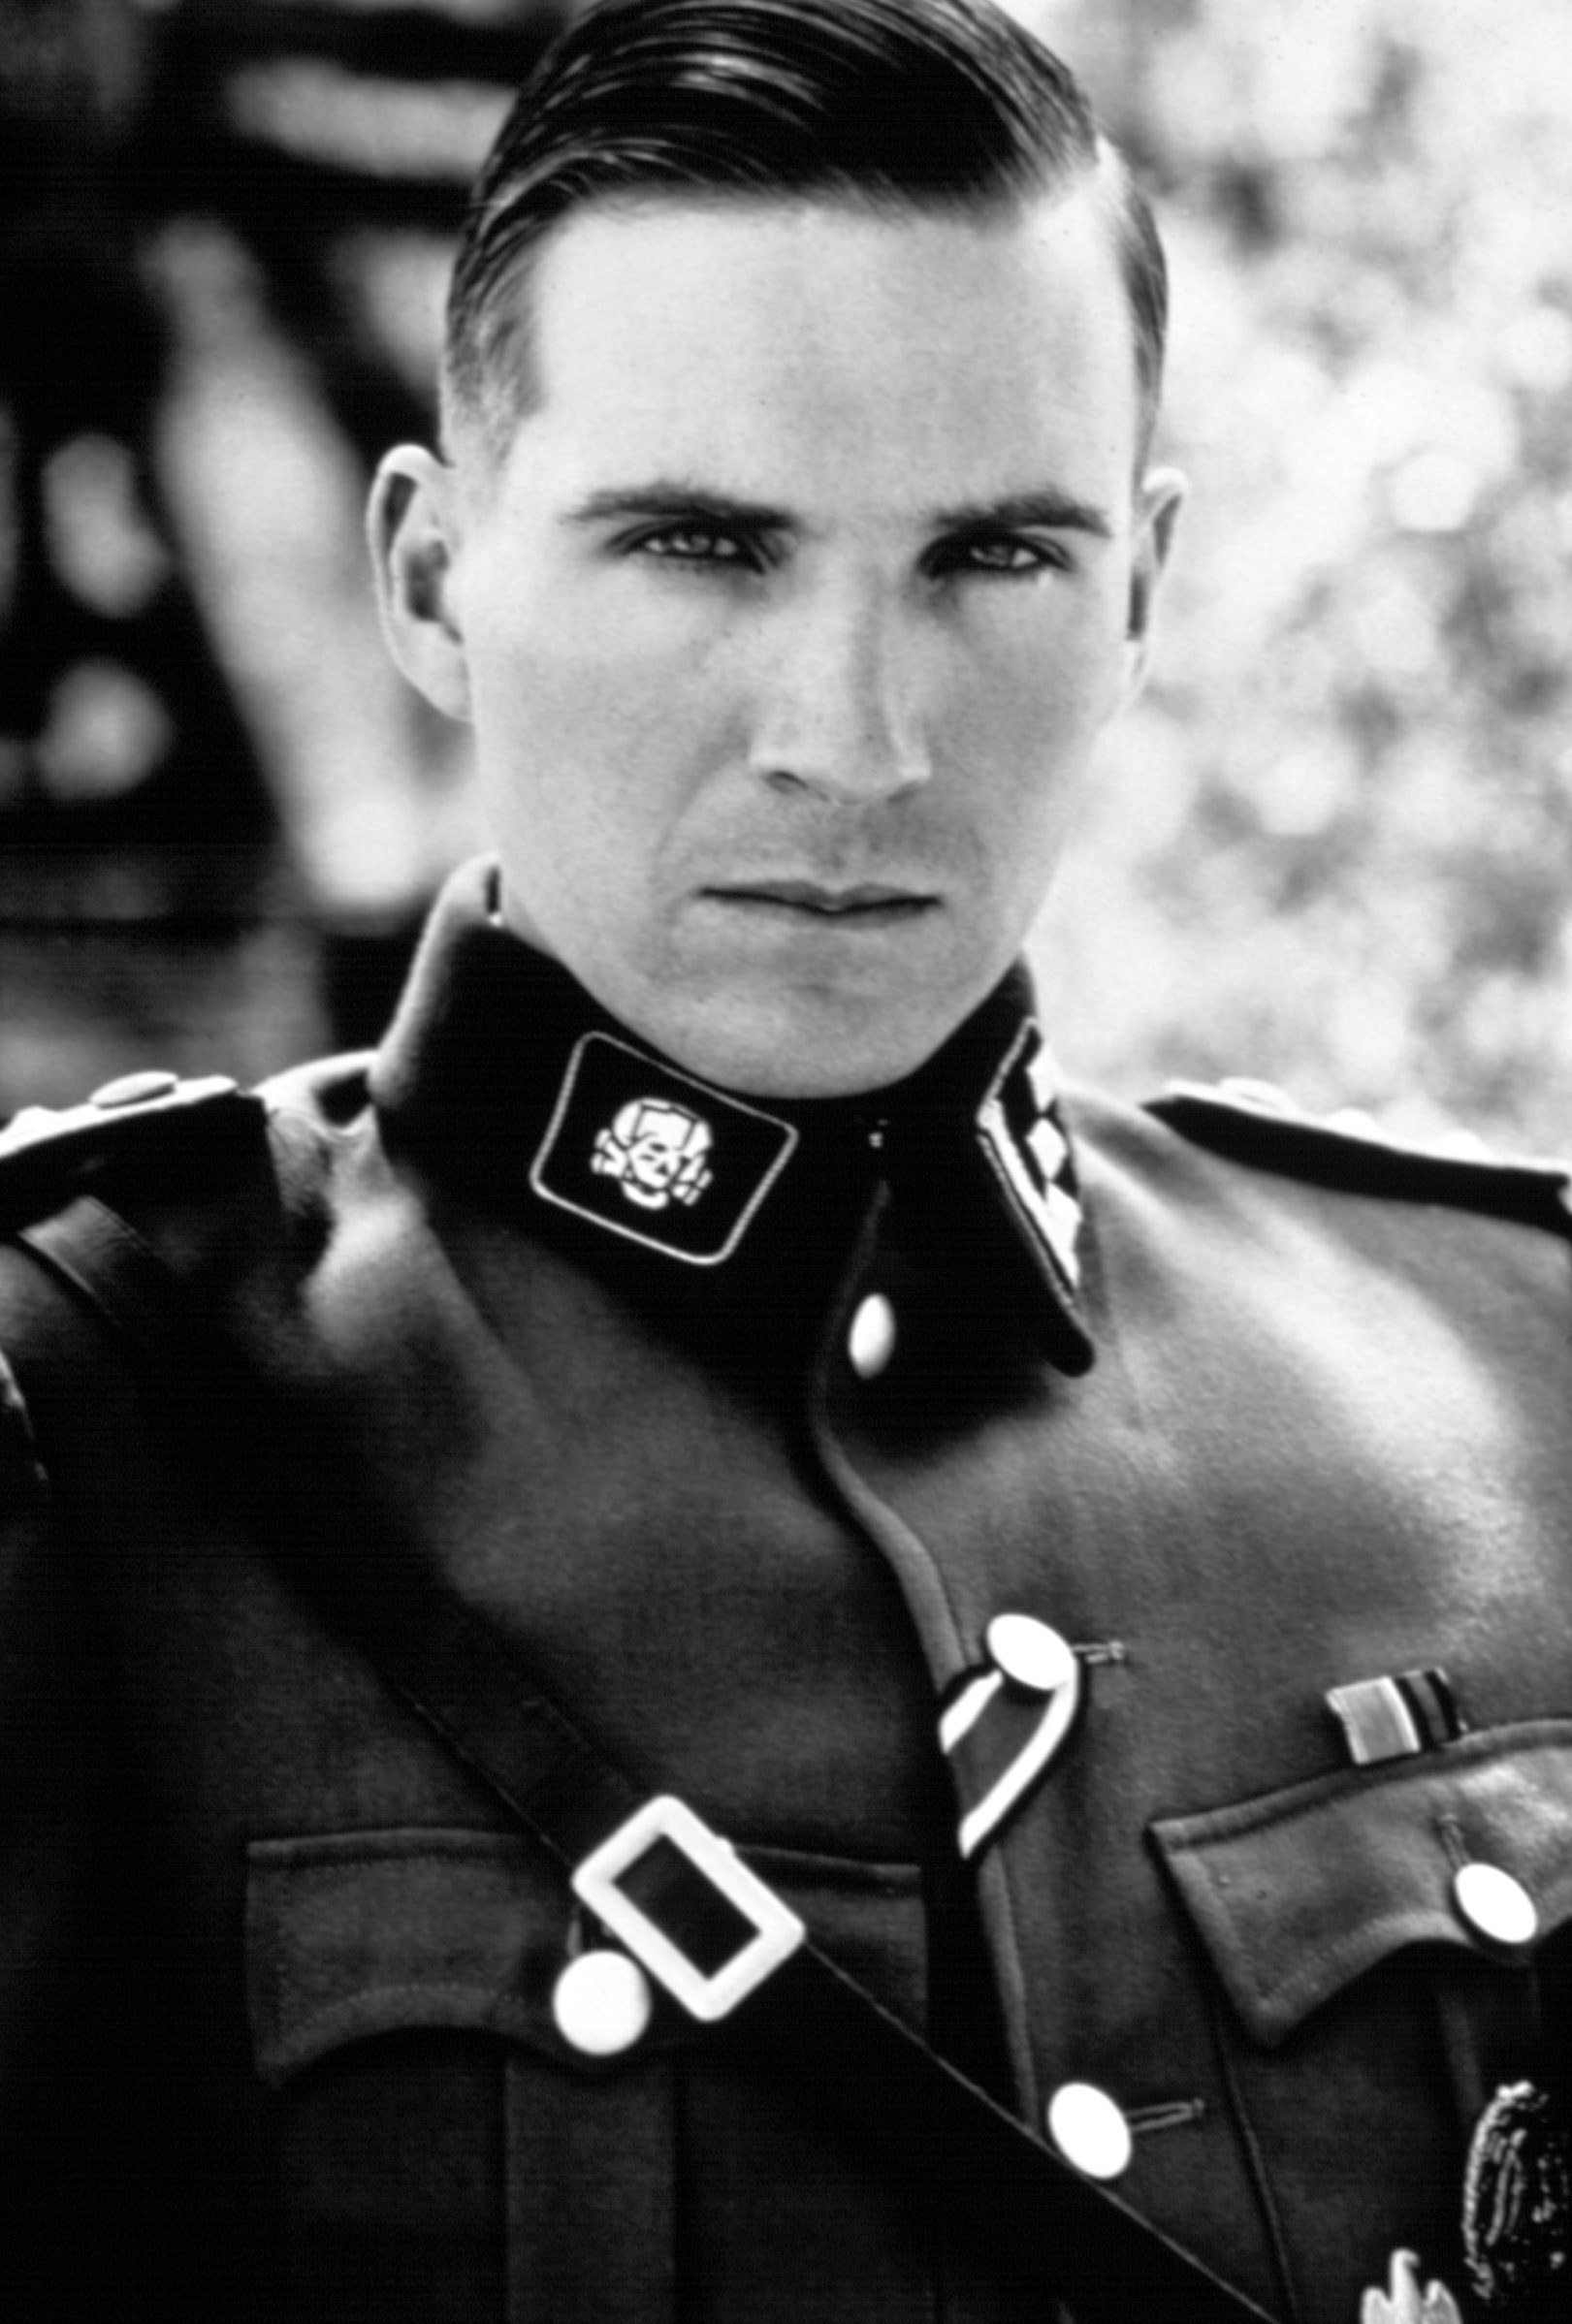 Closeup of young Ralph Fiennes